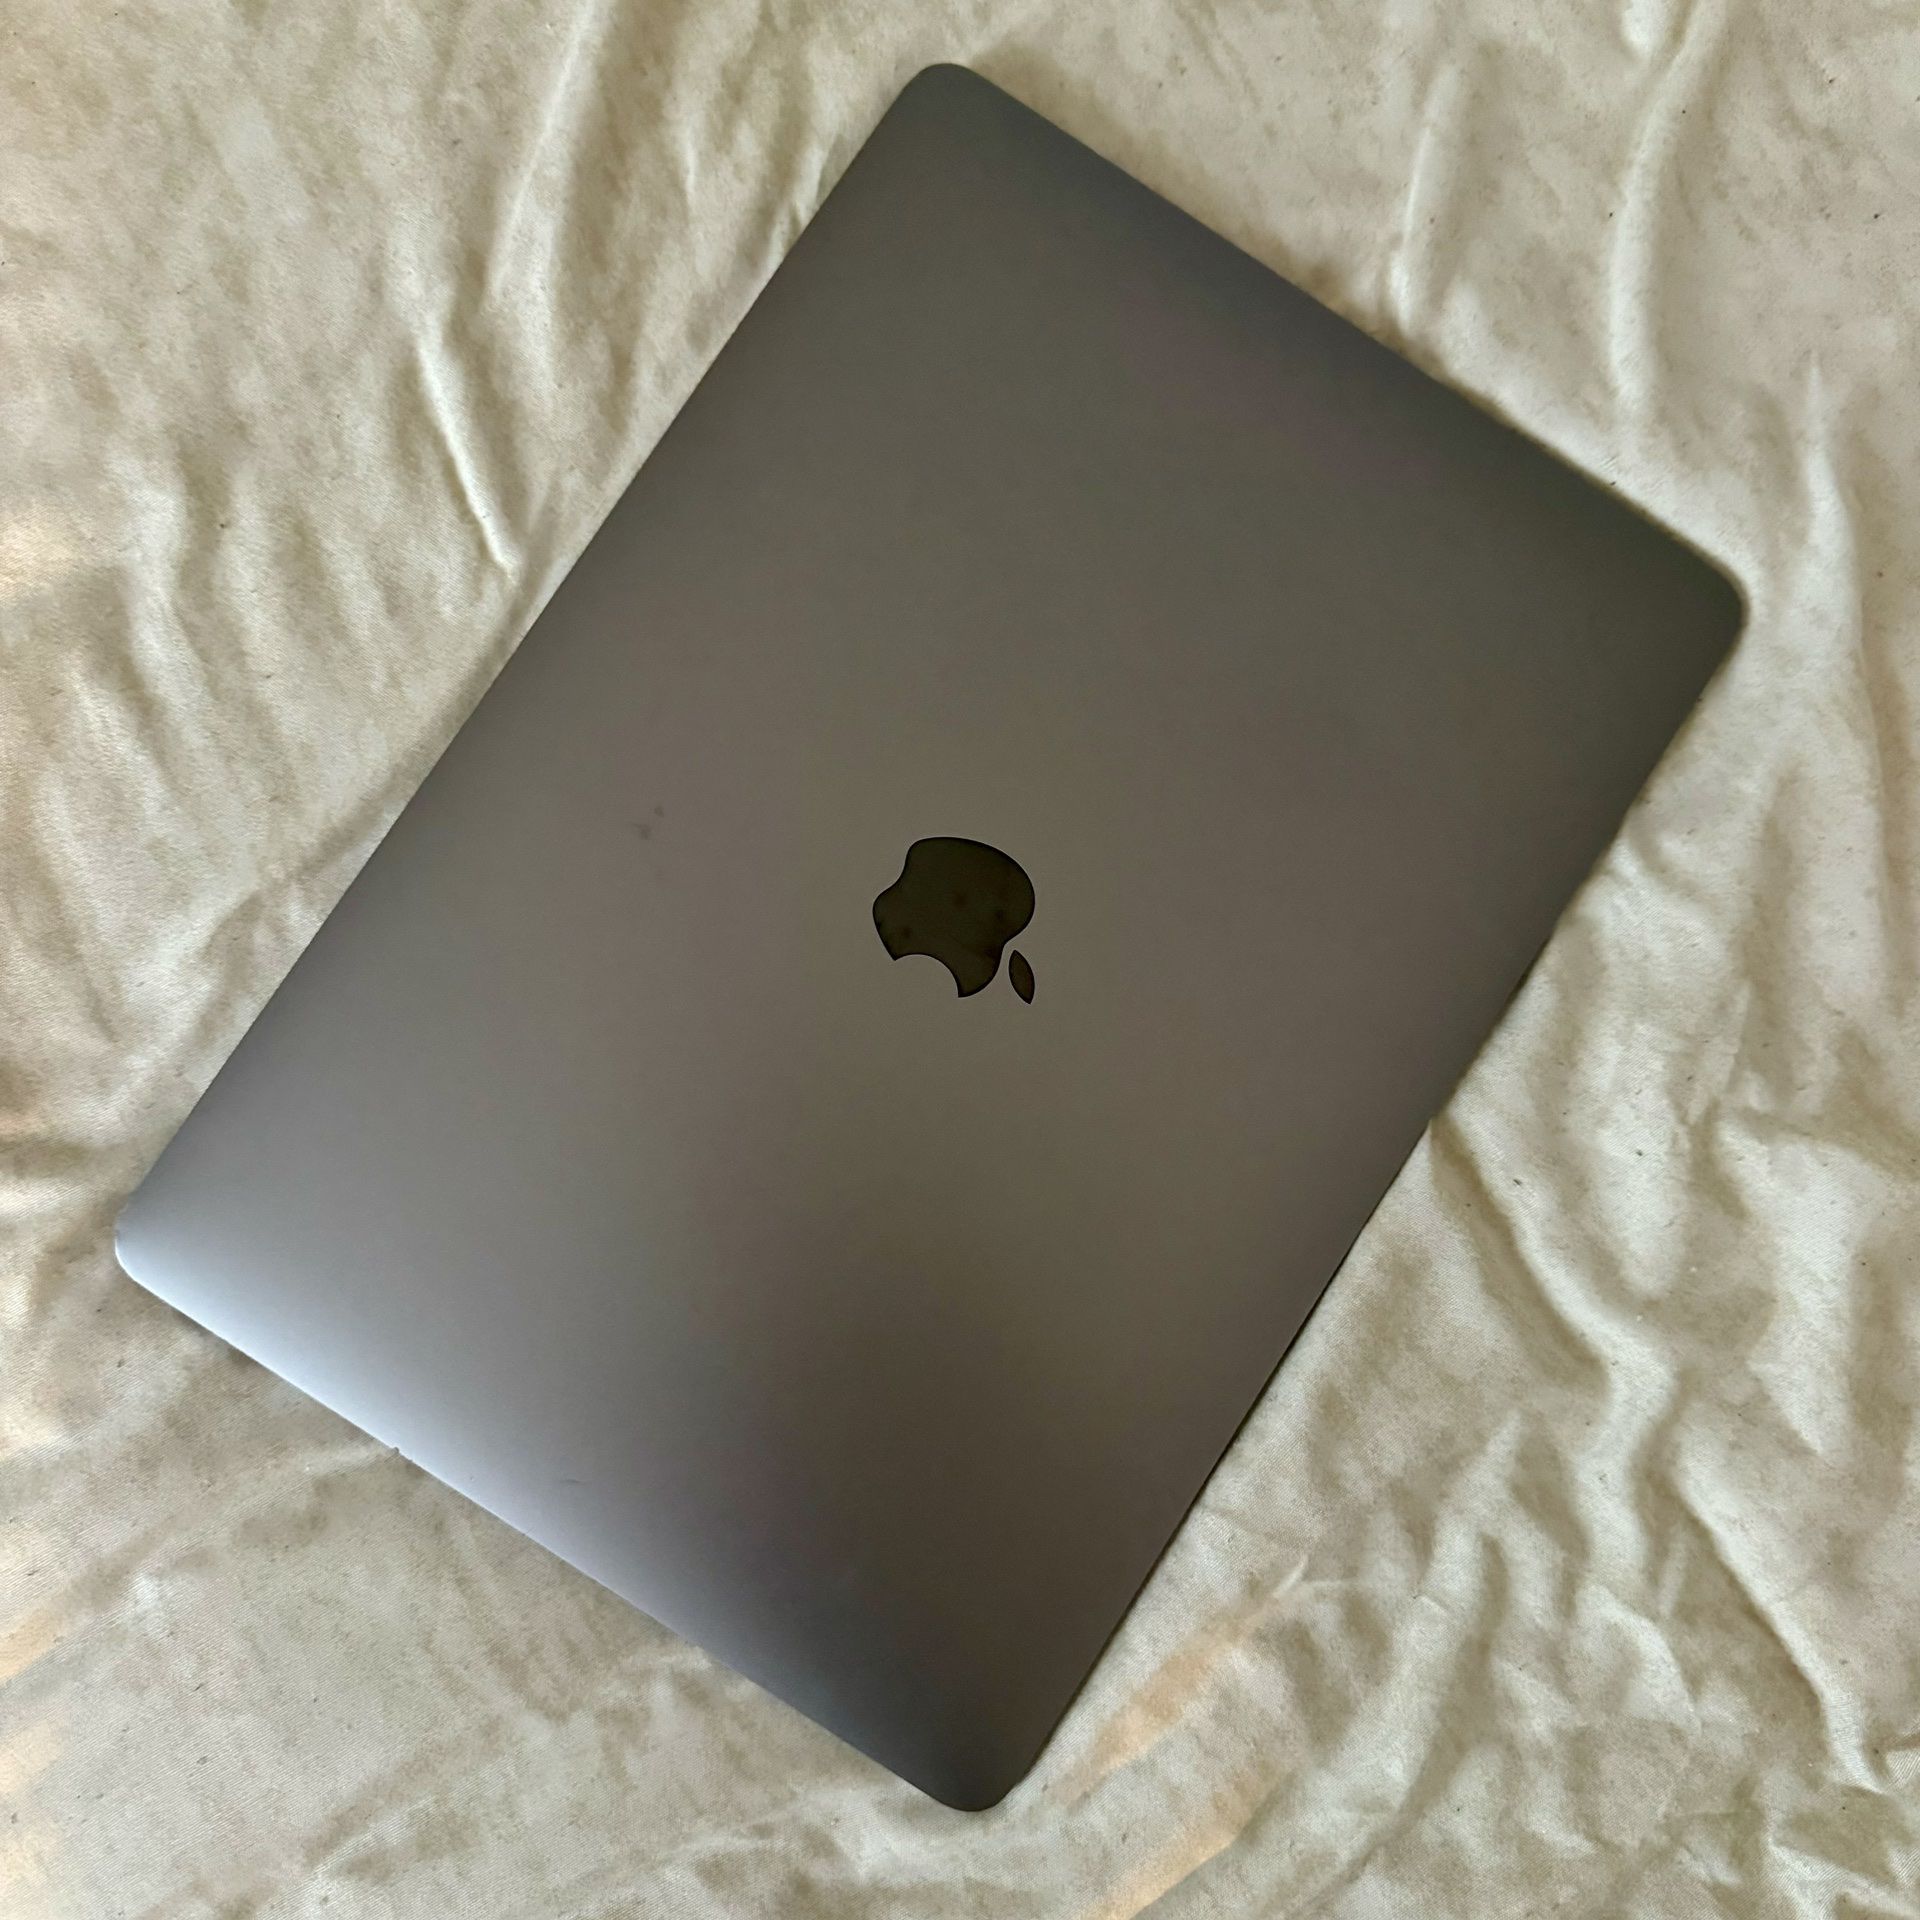 Apple - MacBook Air 13.3" Laptop with Touch ID - Intel Core i5 - 8GB Memory - 128GB Solid State Drive - Space Gray 